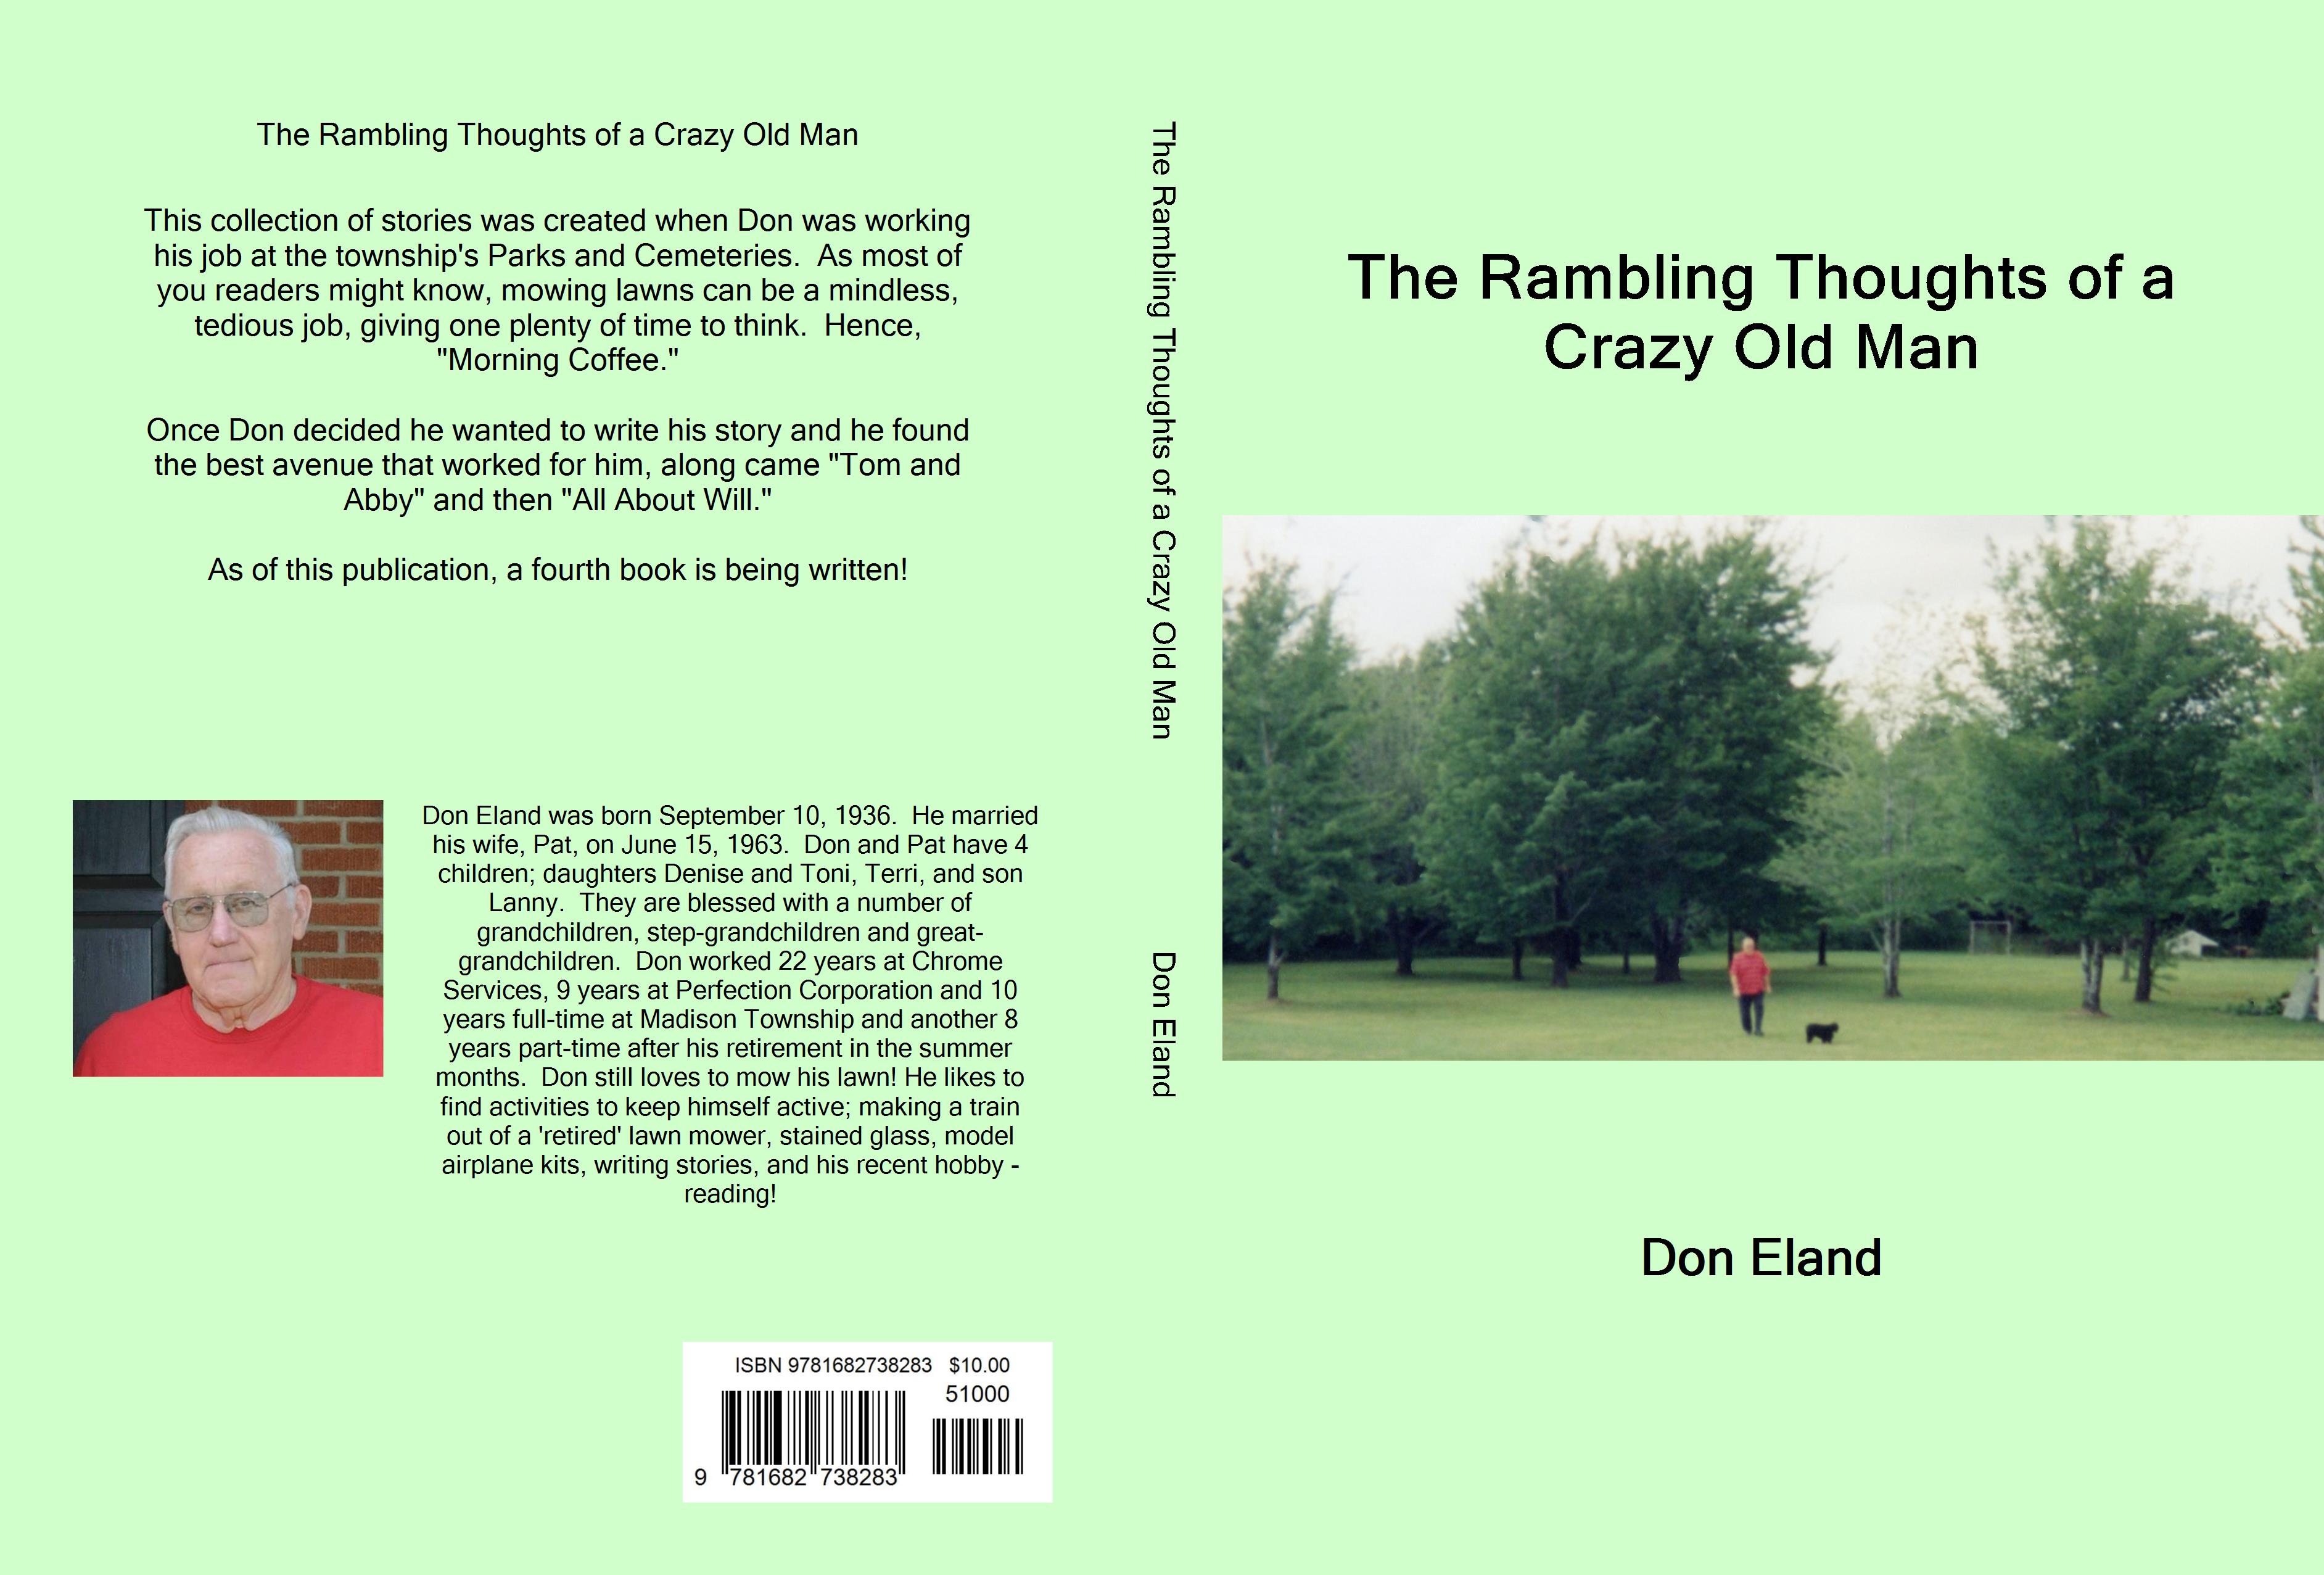 The Rambling Thoughts of a Crazy Old Man cover image